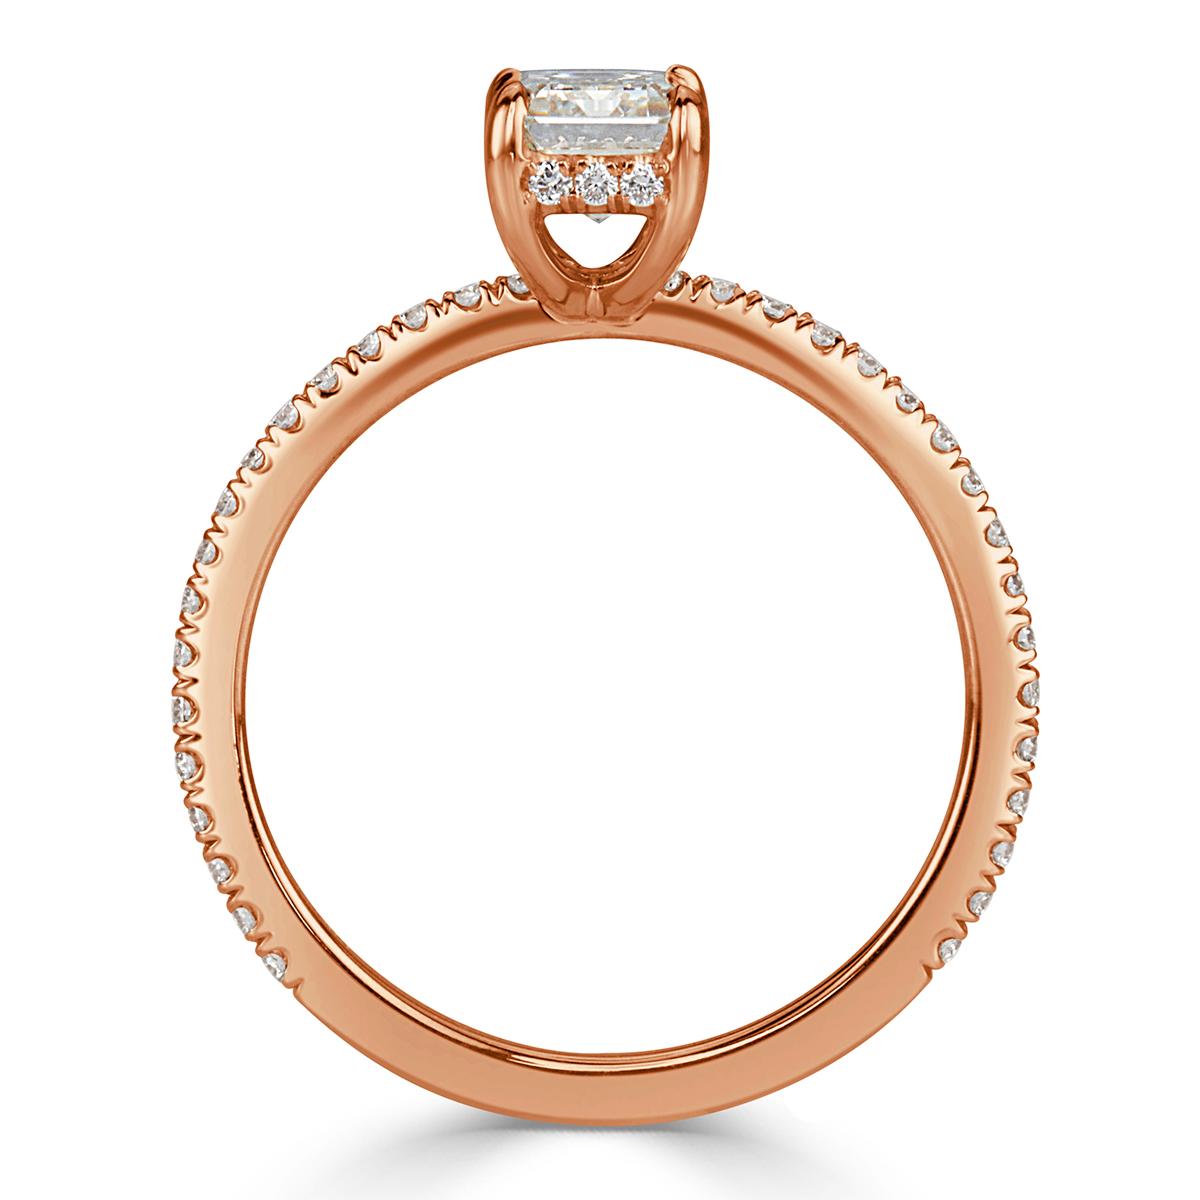 Created in 18k rose gold, this stunning diamond engagement ring features an elegant 1.01ct emerald cut center diamond, GIA certified at G-VS1. It is perfectly white and clear with amazing measurements of 6.79 x 4.57 mm. It is accented by a hidden